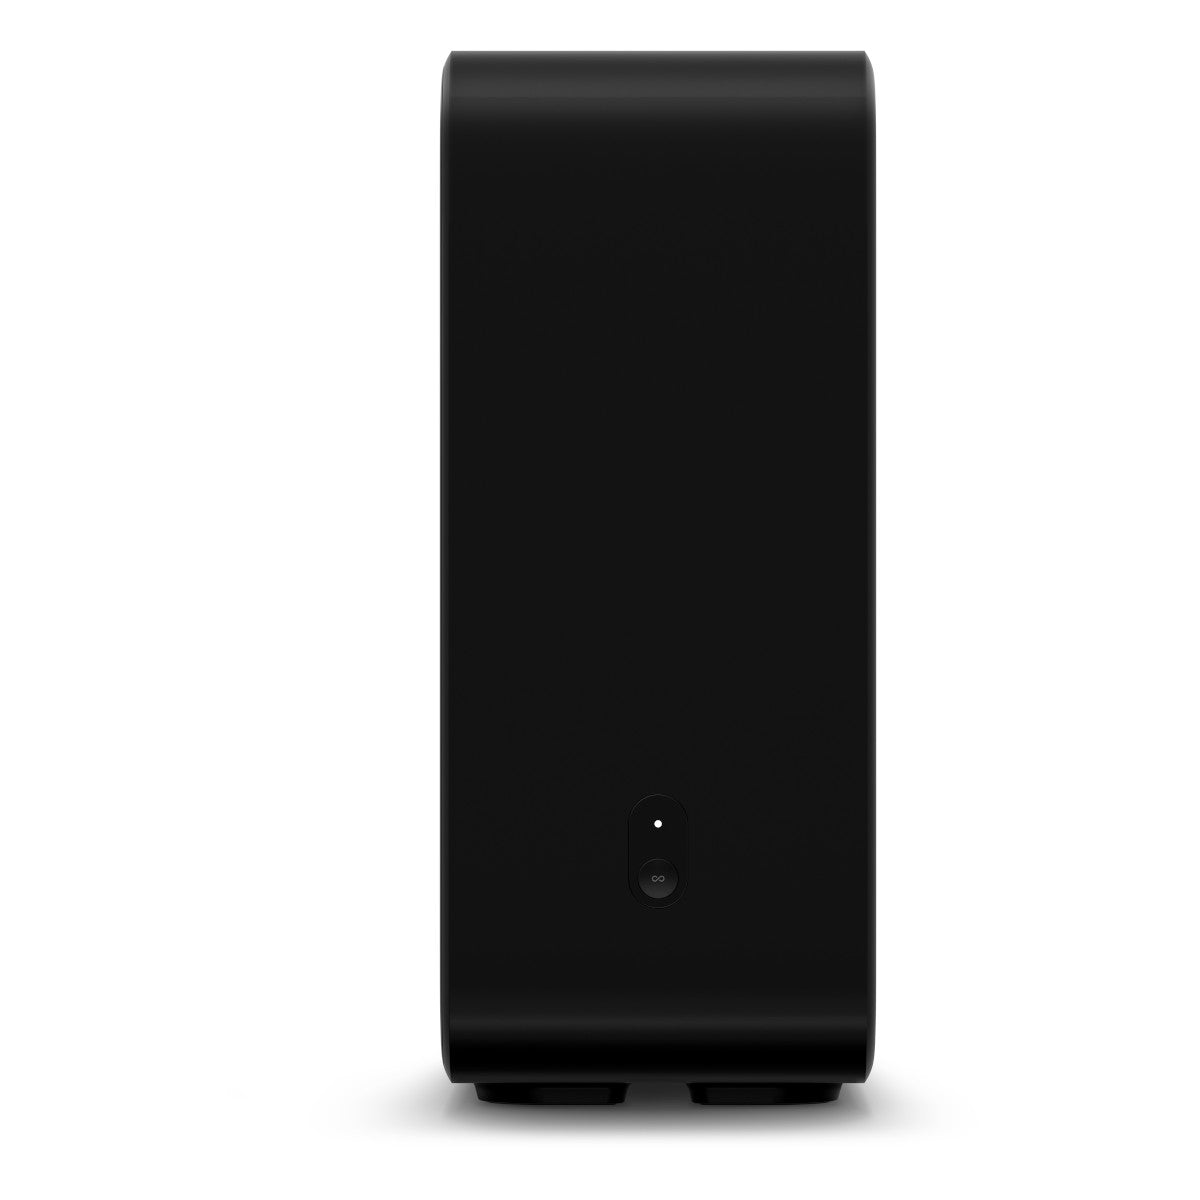 Wireless Sub World 3) (Gen Wide Subwoofer (Black) | for Theater Home Stereo Sonos